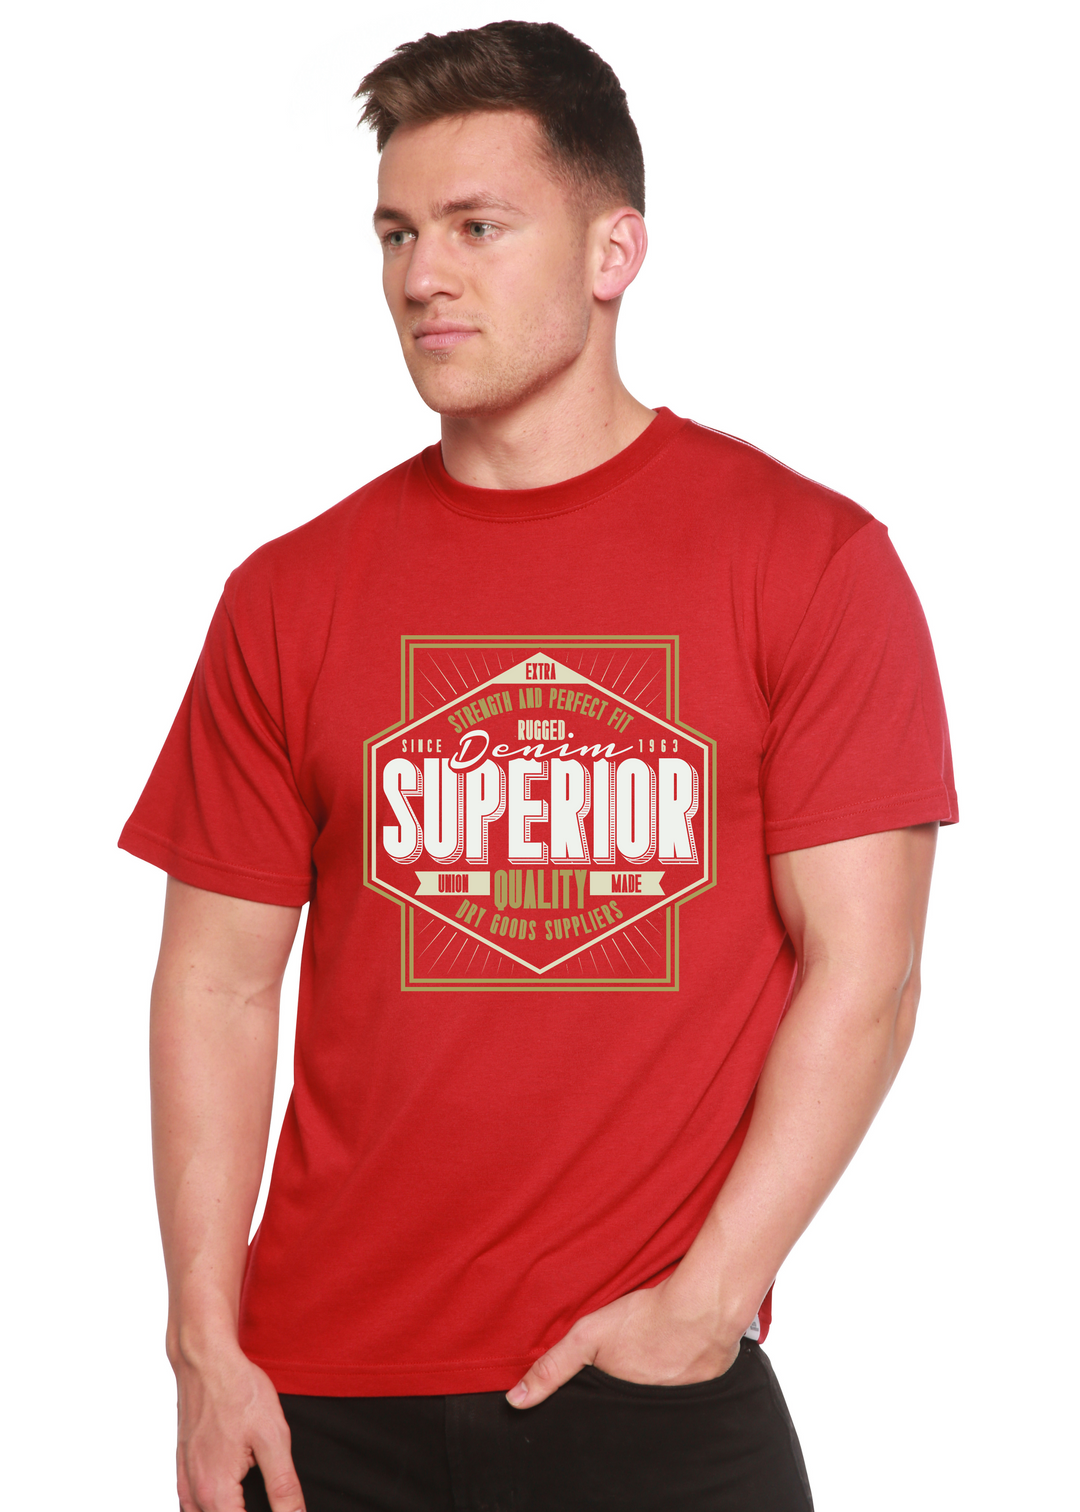 Superior Quality men's bamboo tshirt pompeian red